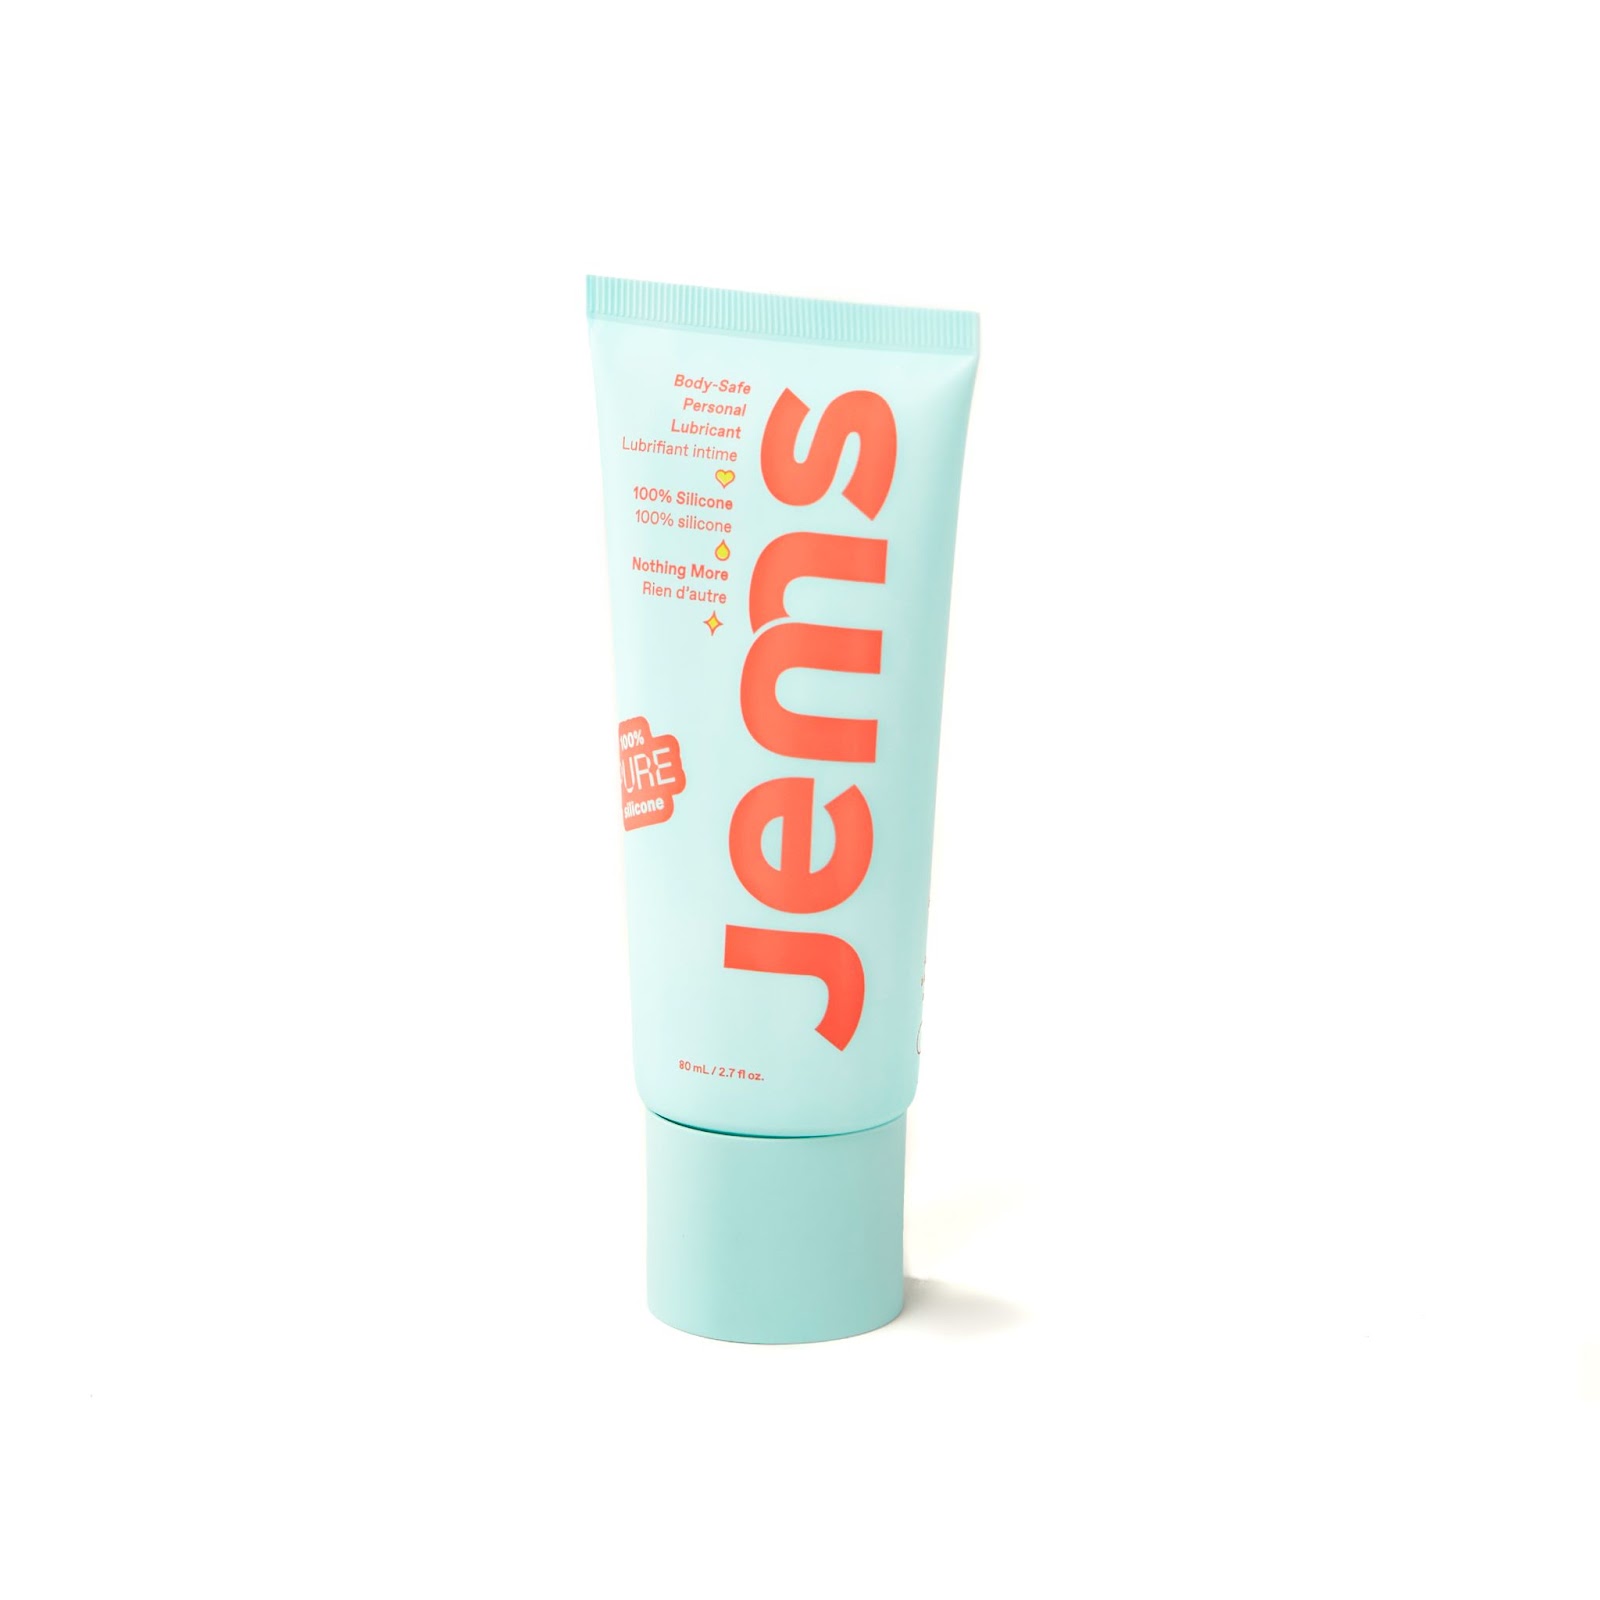 Jems 100% Silicone Lube